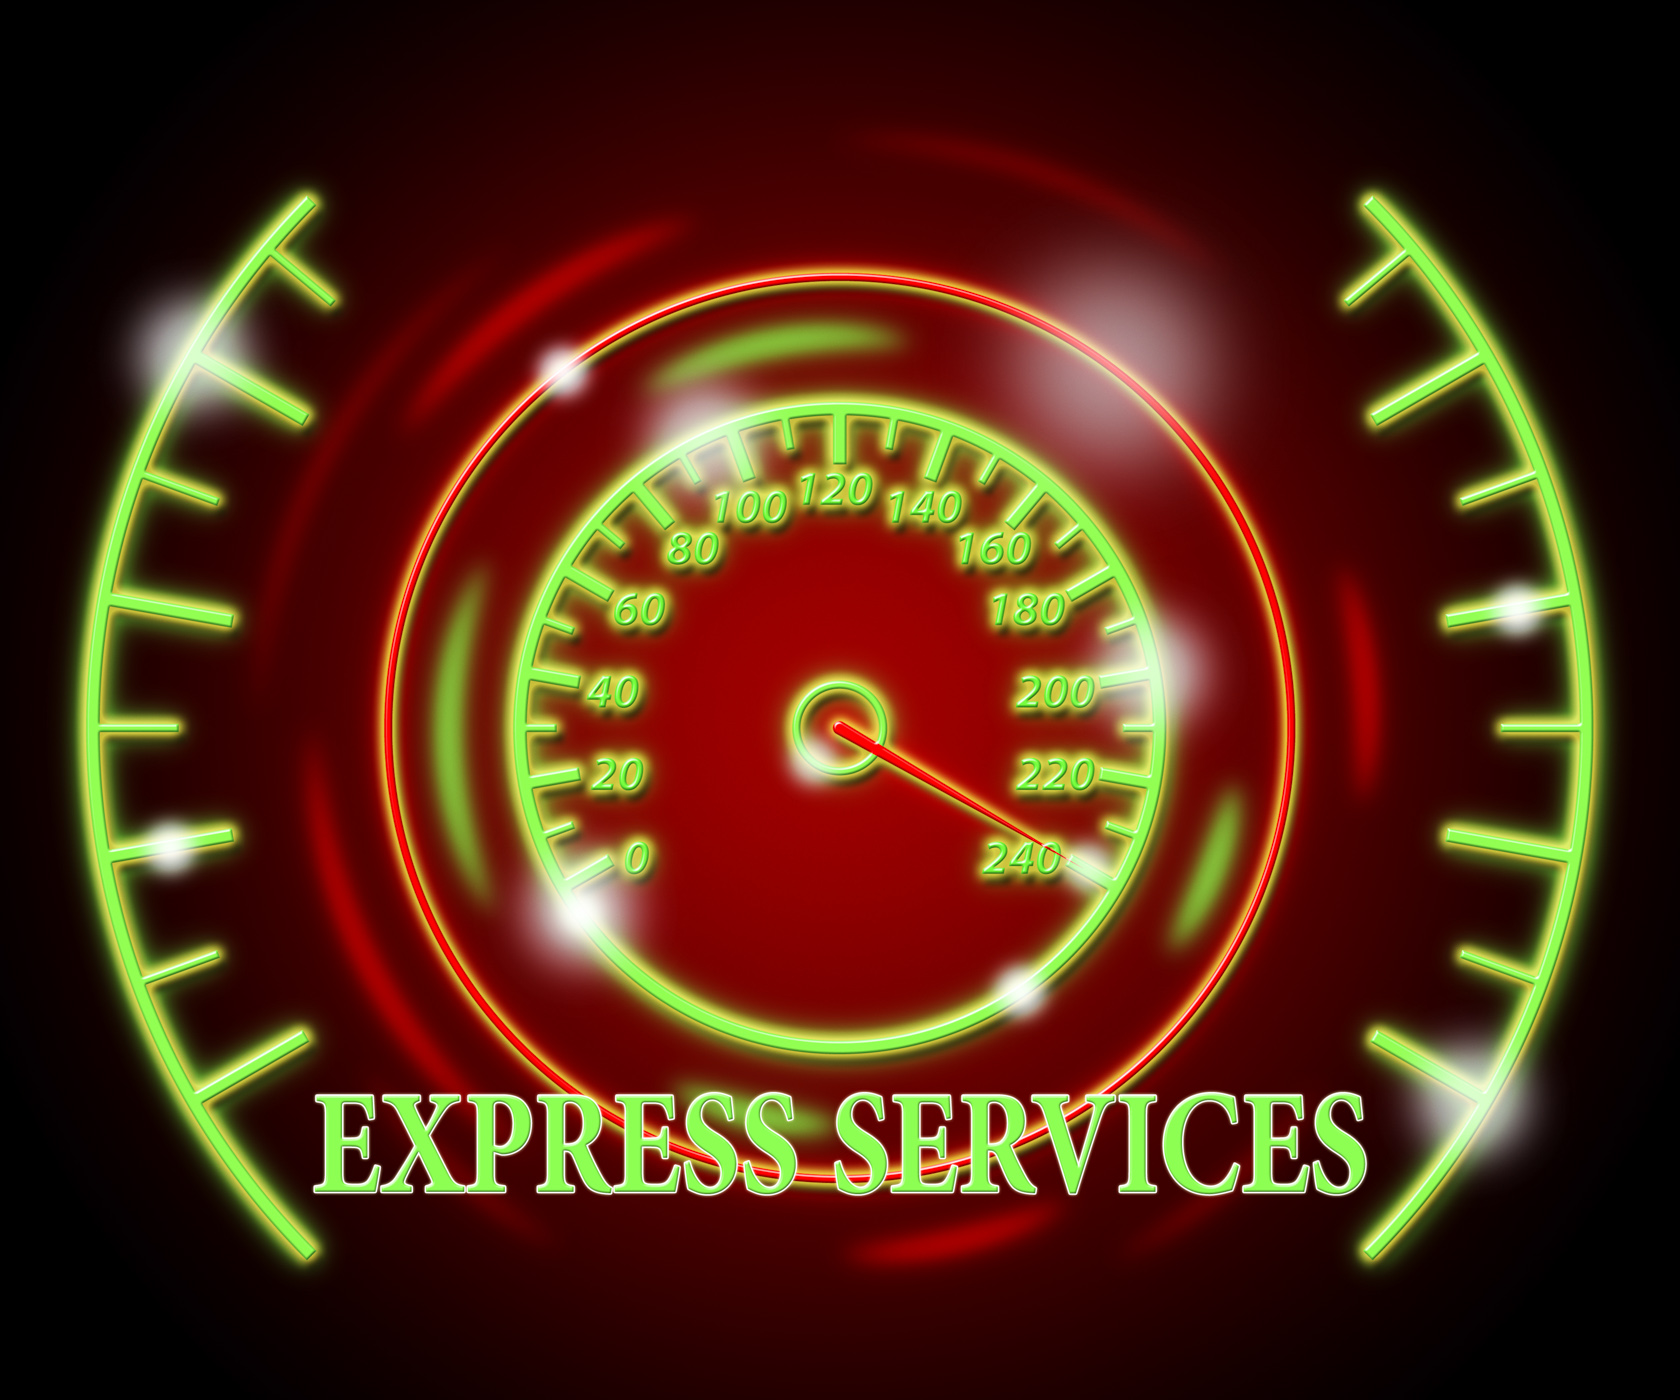 Express services shows help desk and action photo